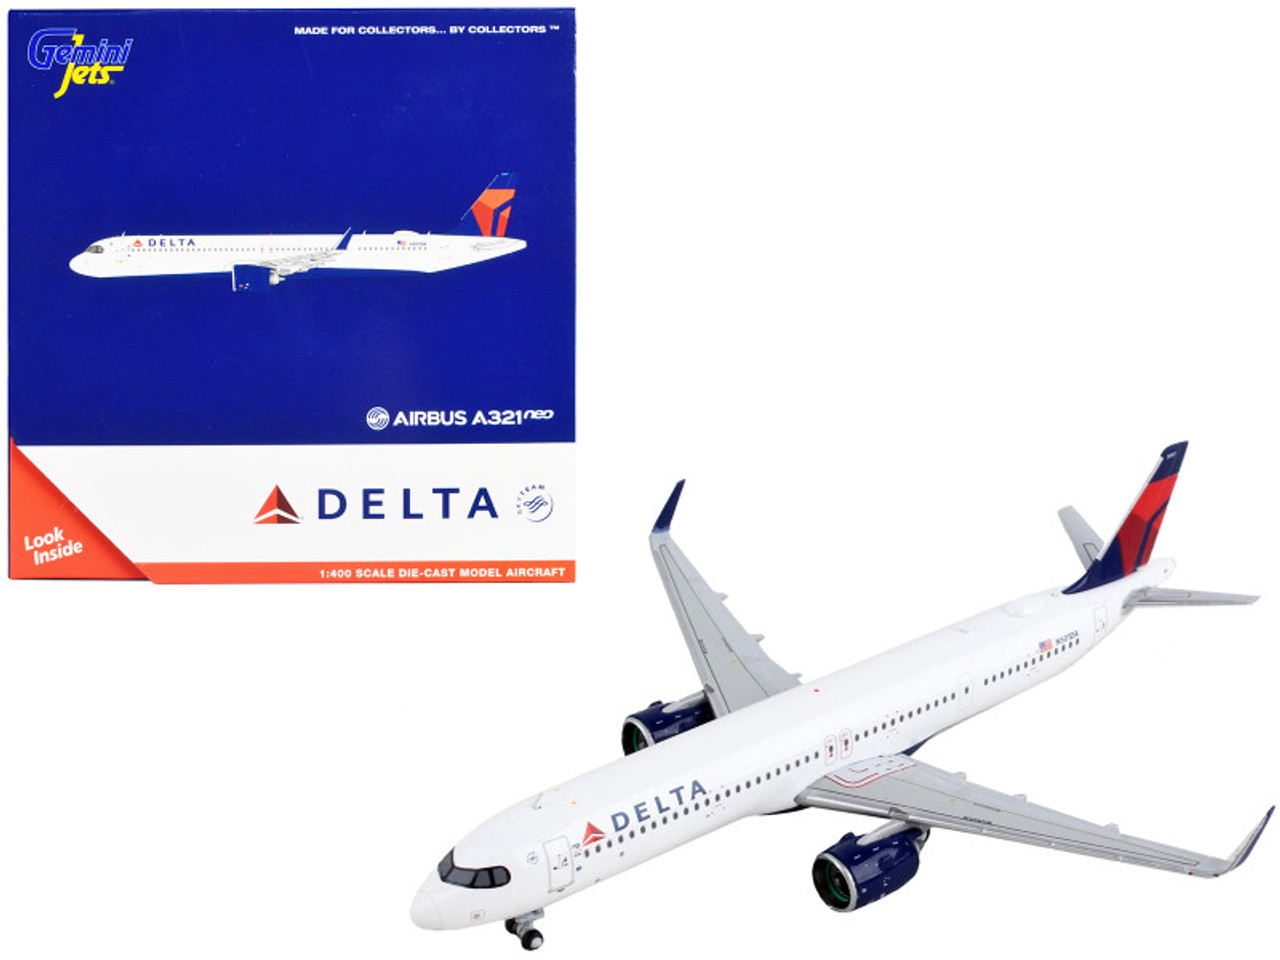 Airbus A321neo Commercial Aircraft "Delta Air Lines" White with Blue Tail 1/400 Diecast Model Airplane by GeminiJets